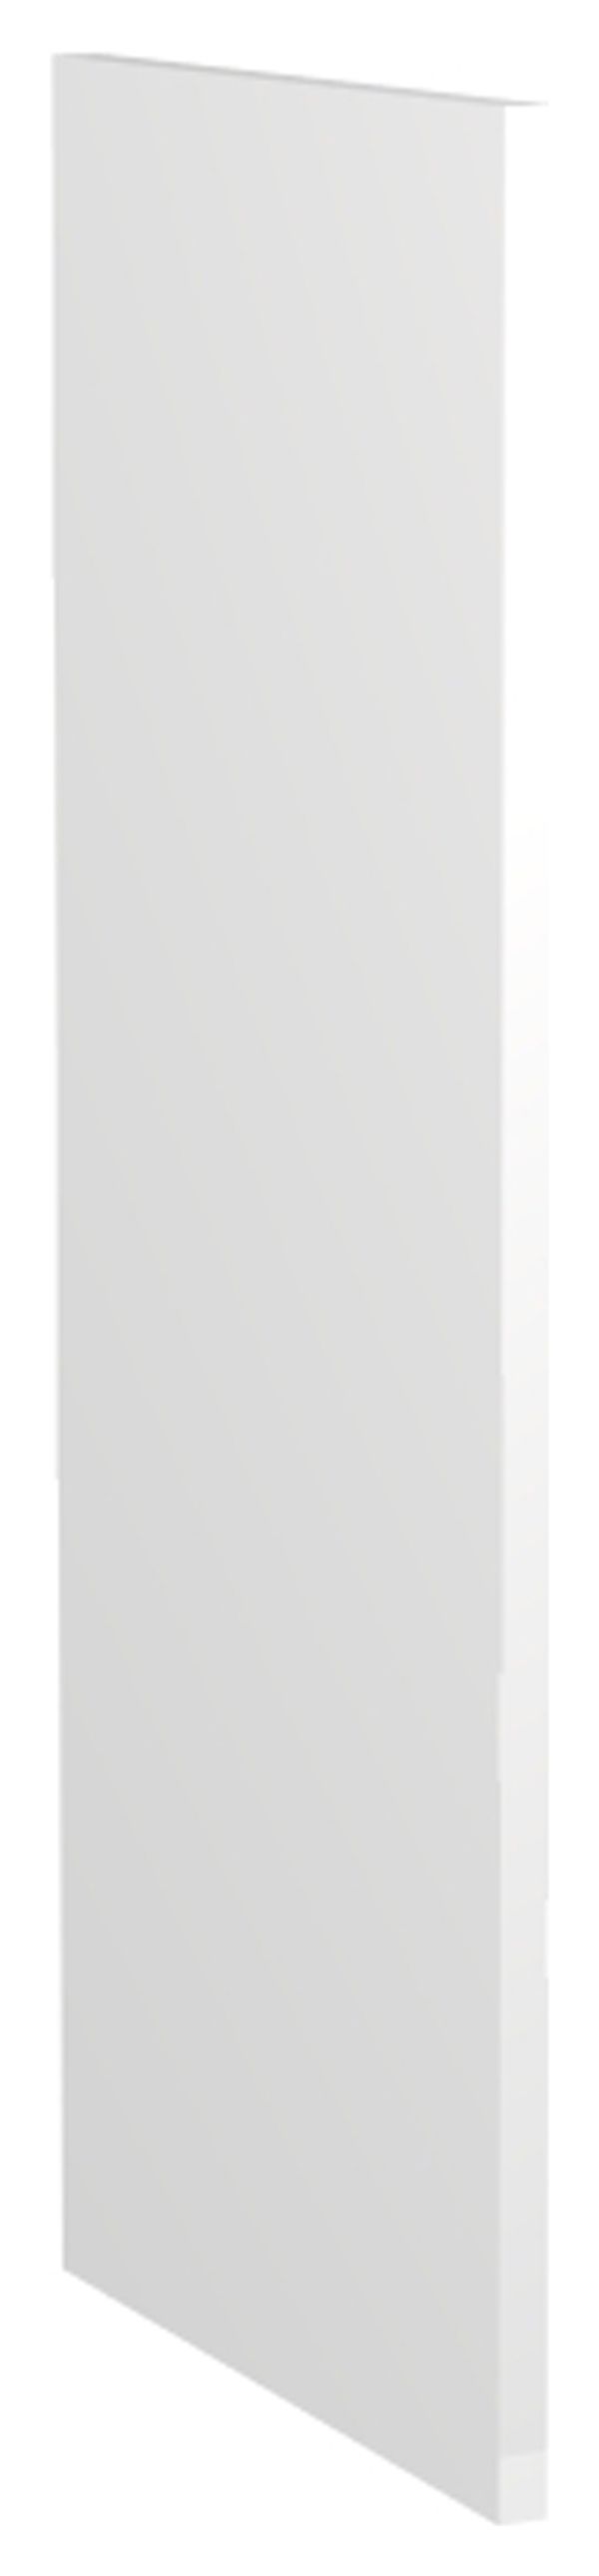 Image of Wickes Vienna Grey Wall Decor End Panel - 18mm